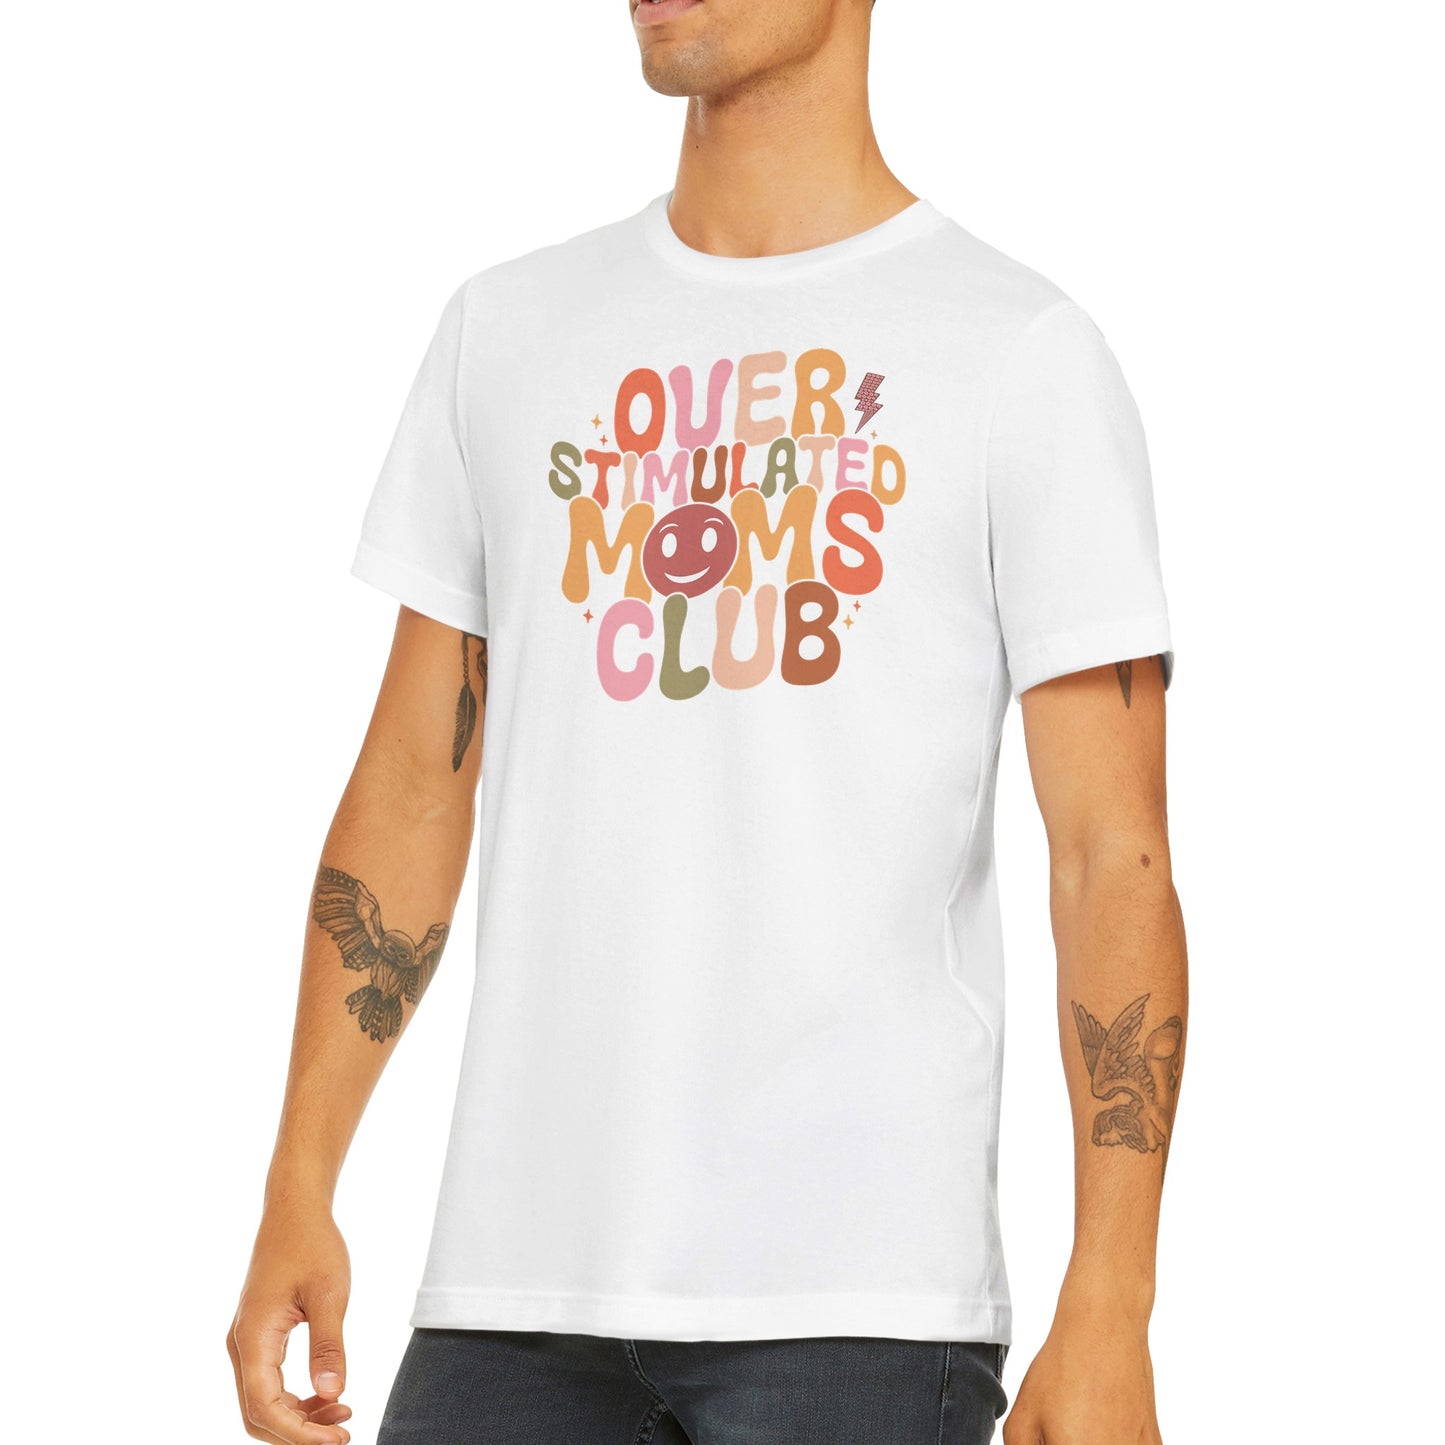 Overstimulated Moms Club T-shirt